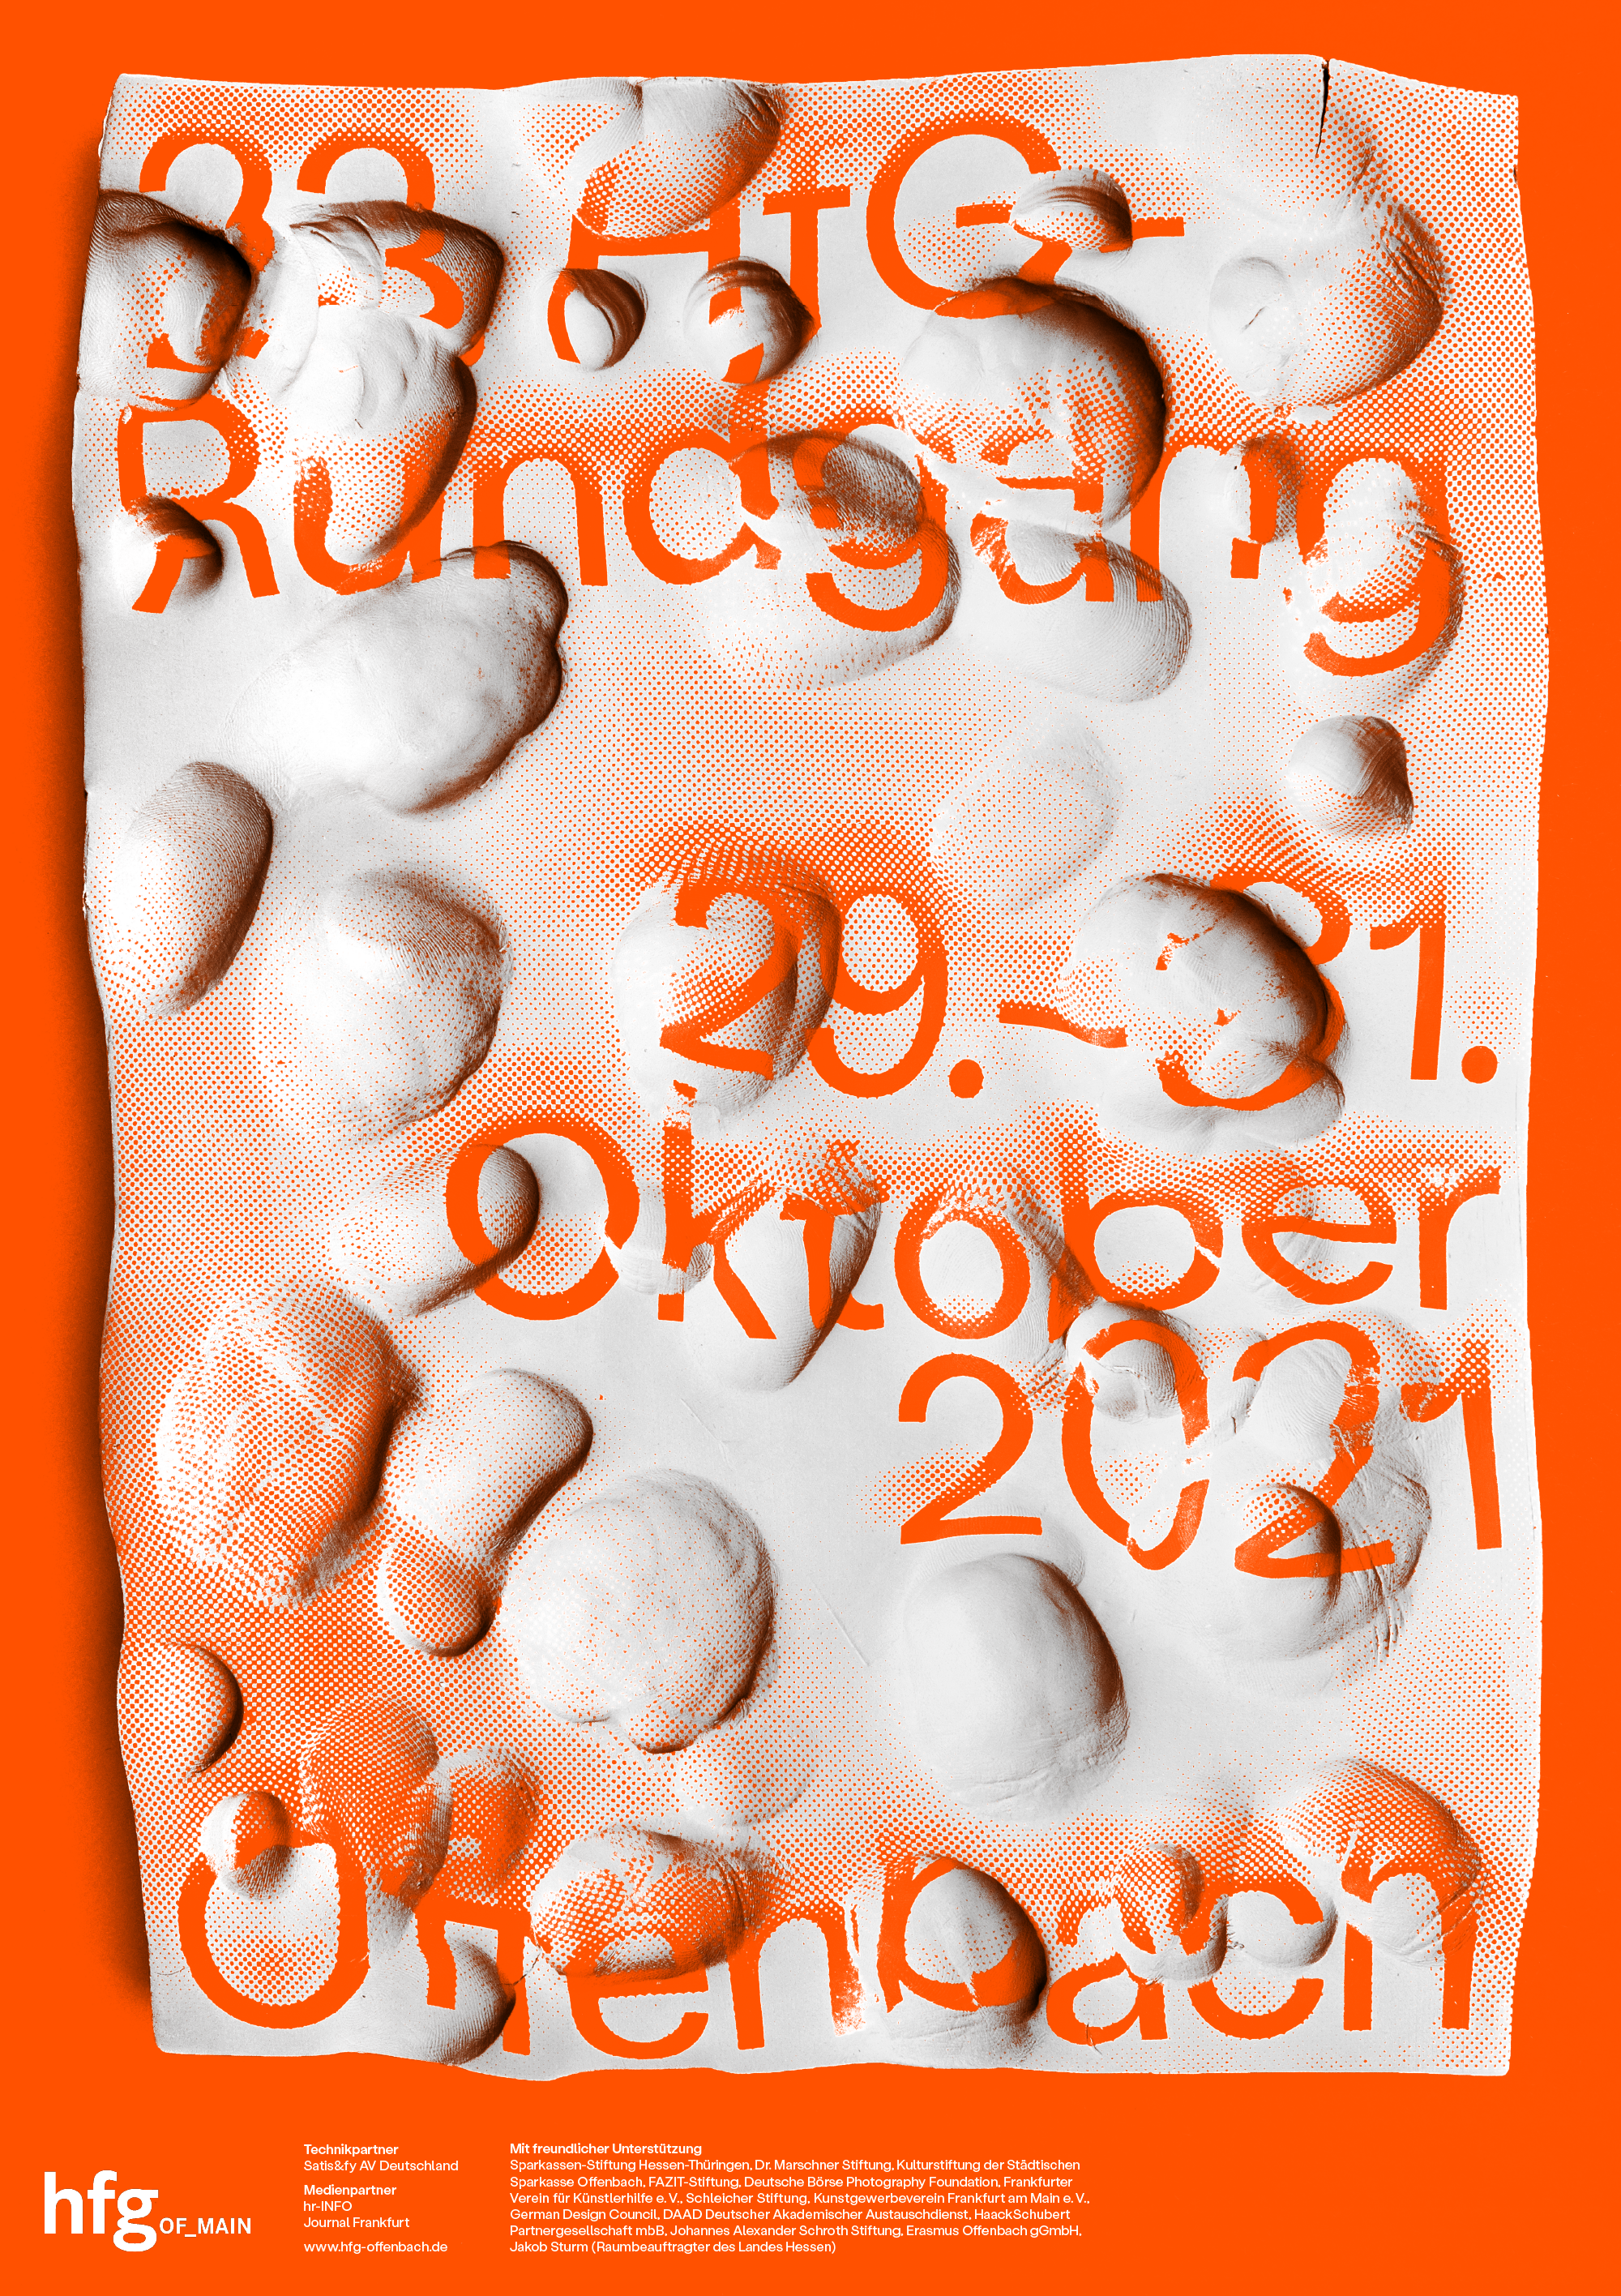 orange hands on poster design picturing screenprinted and deformed clay by Sarah Stendel Graphic Design